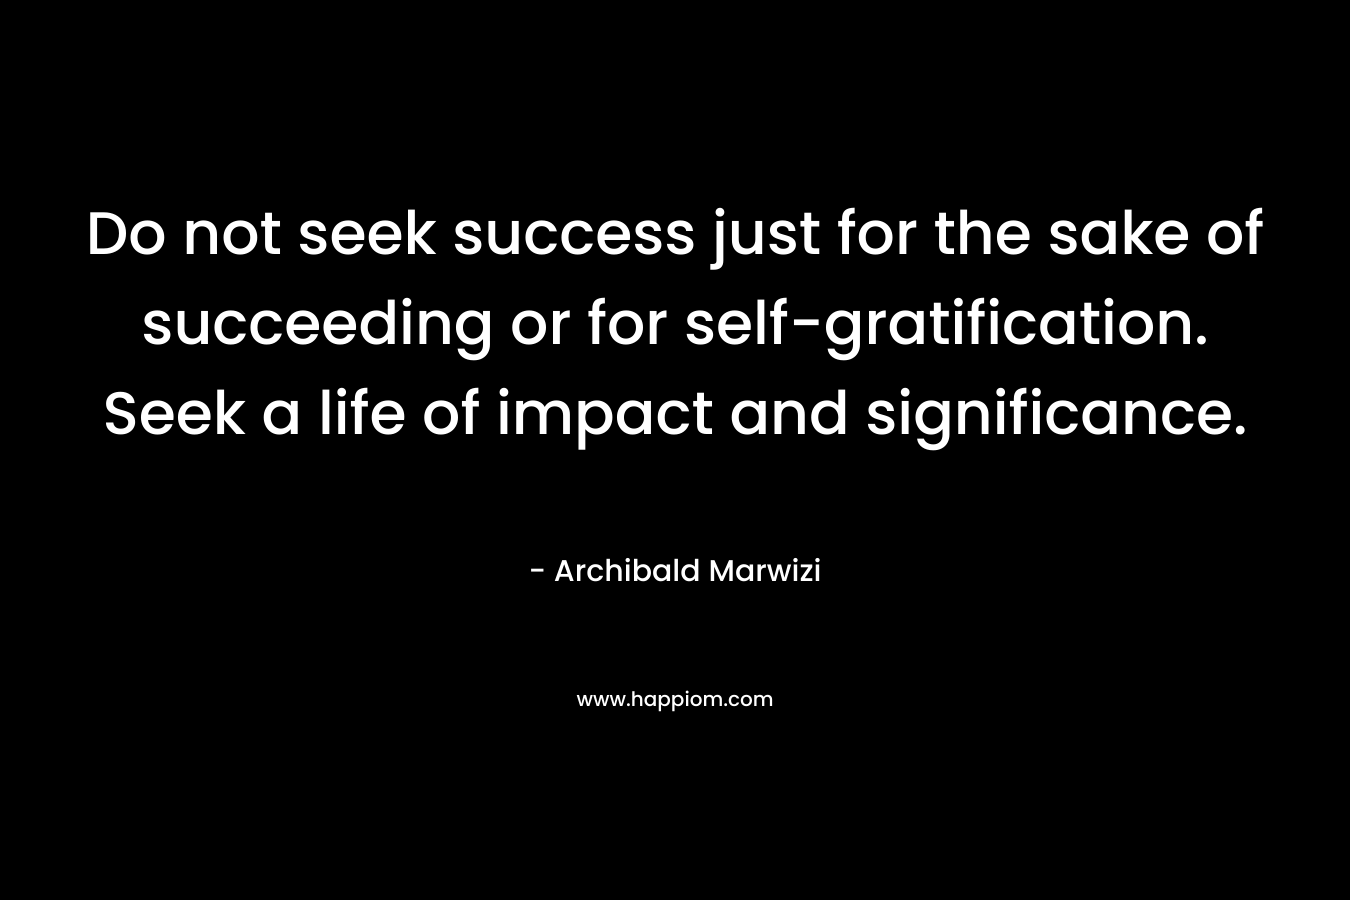 Do not seek success just for the sake of succeeding or for self-gratification. Seek a life of impact and significance.